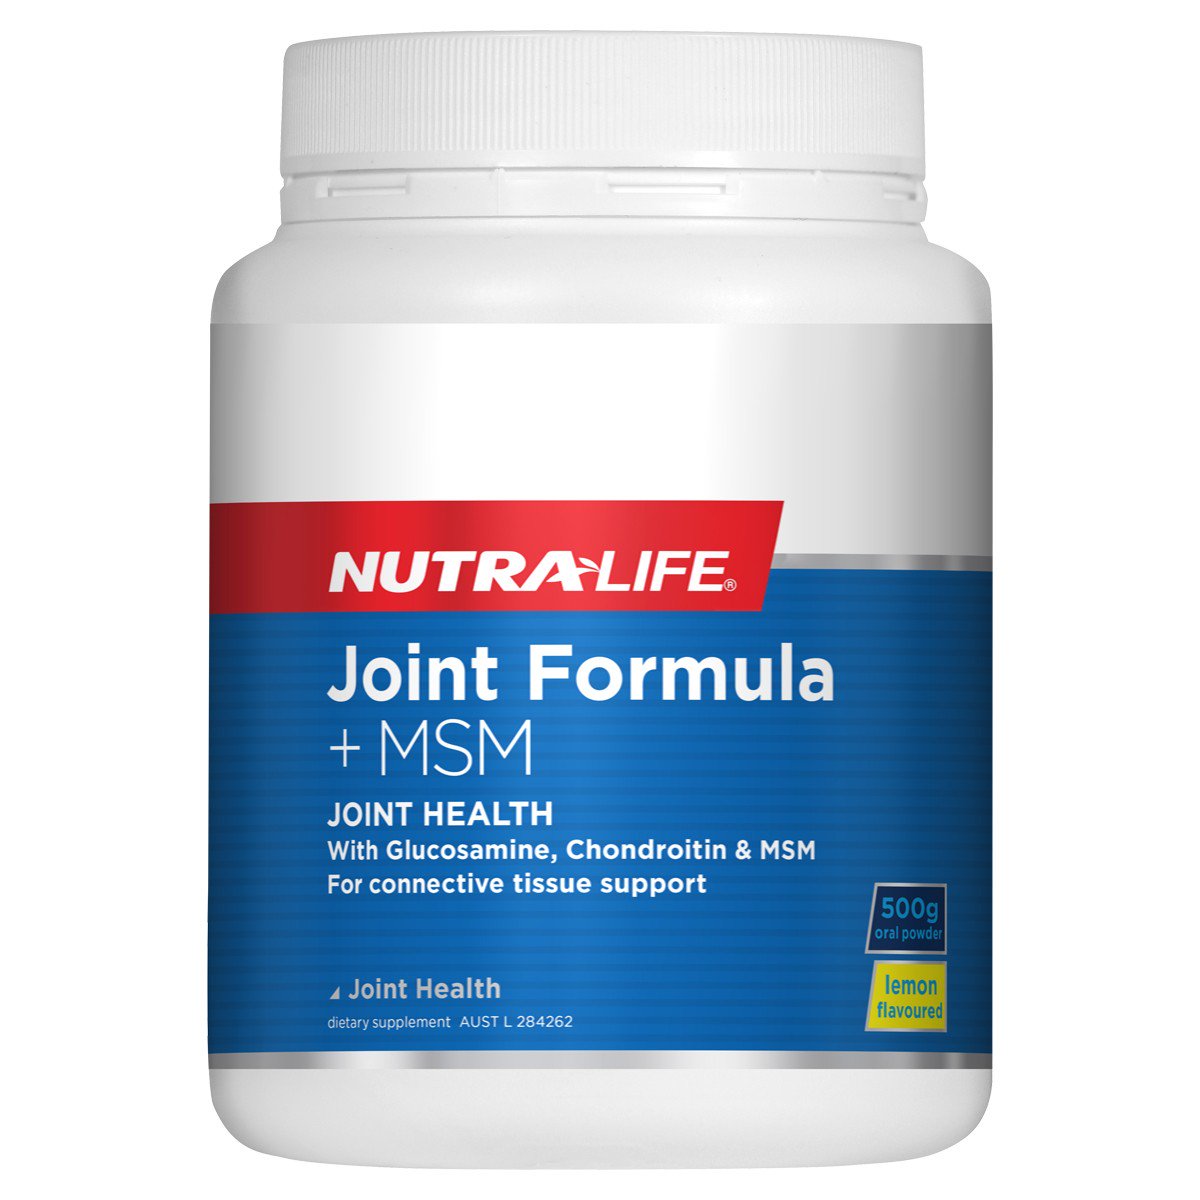 Nutra-Life Joint Formula + MSM